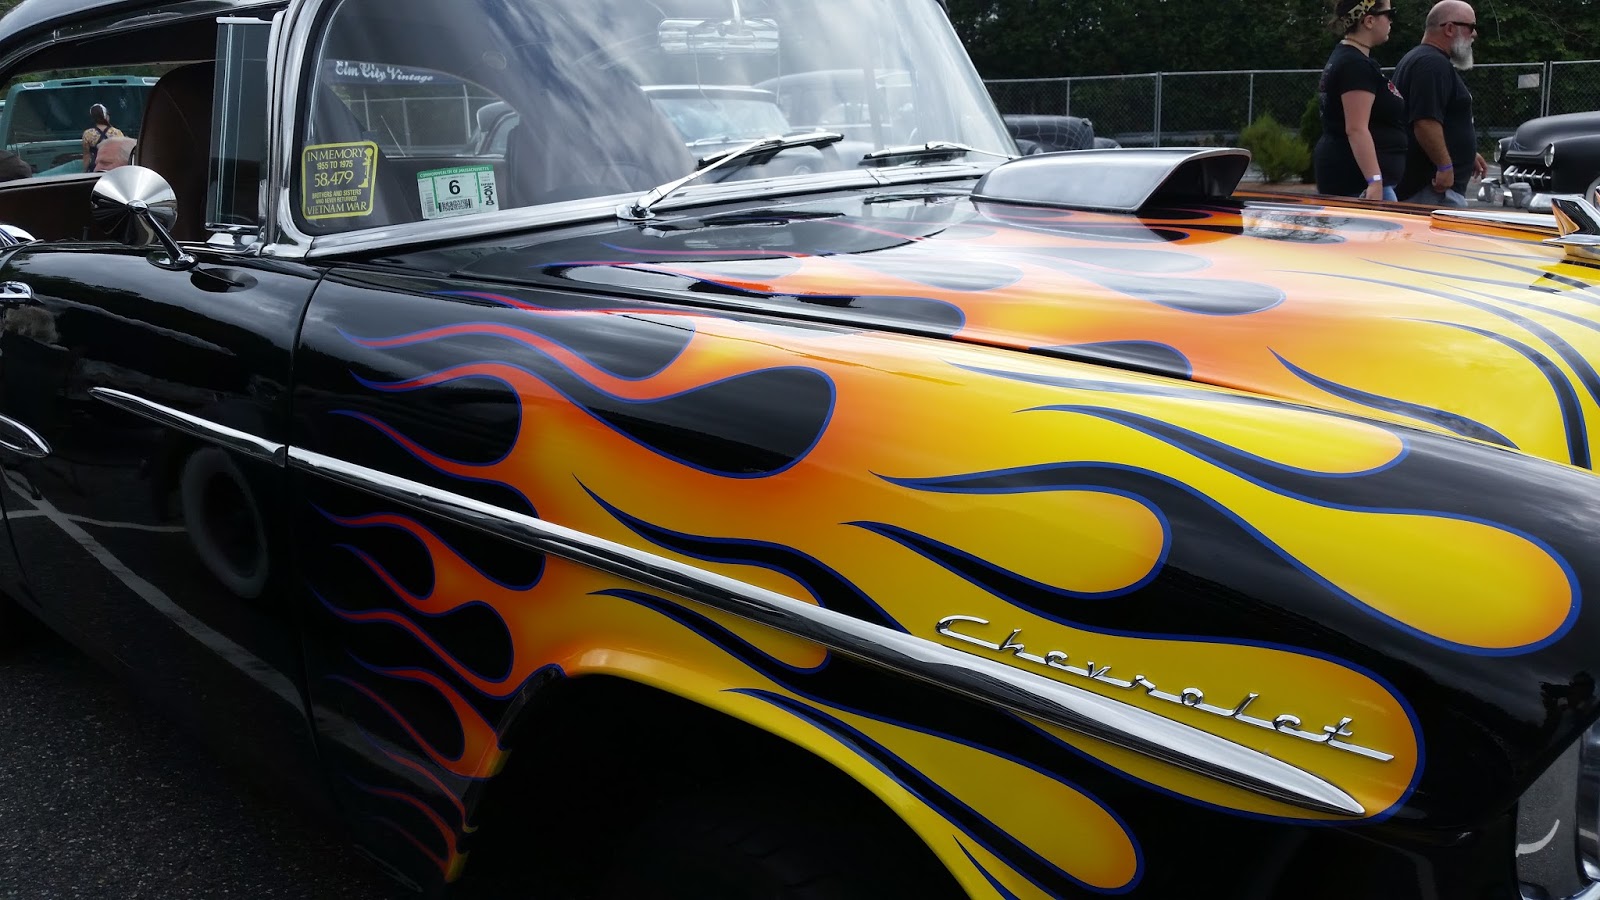 16 Flames - Old School ideas  flame art, pinstriping designs